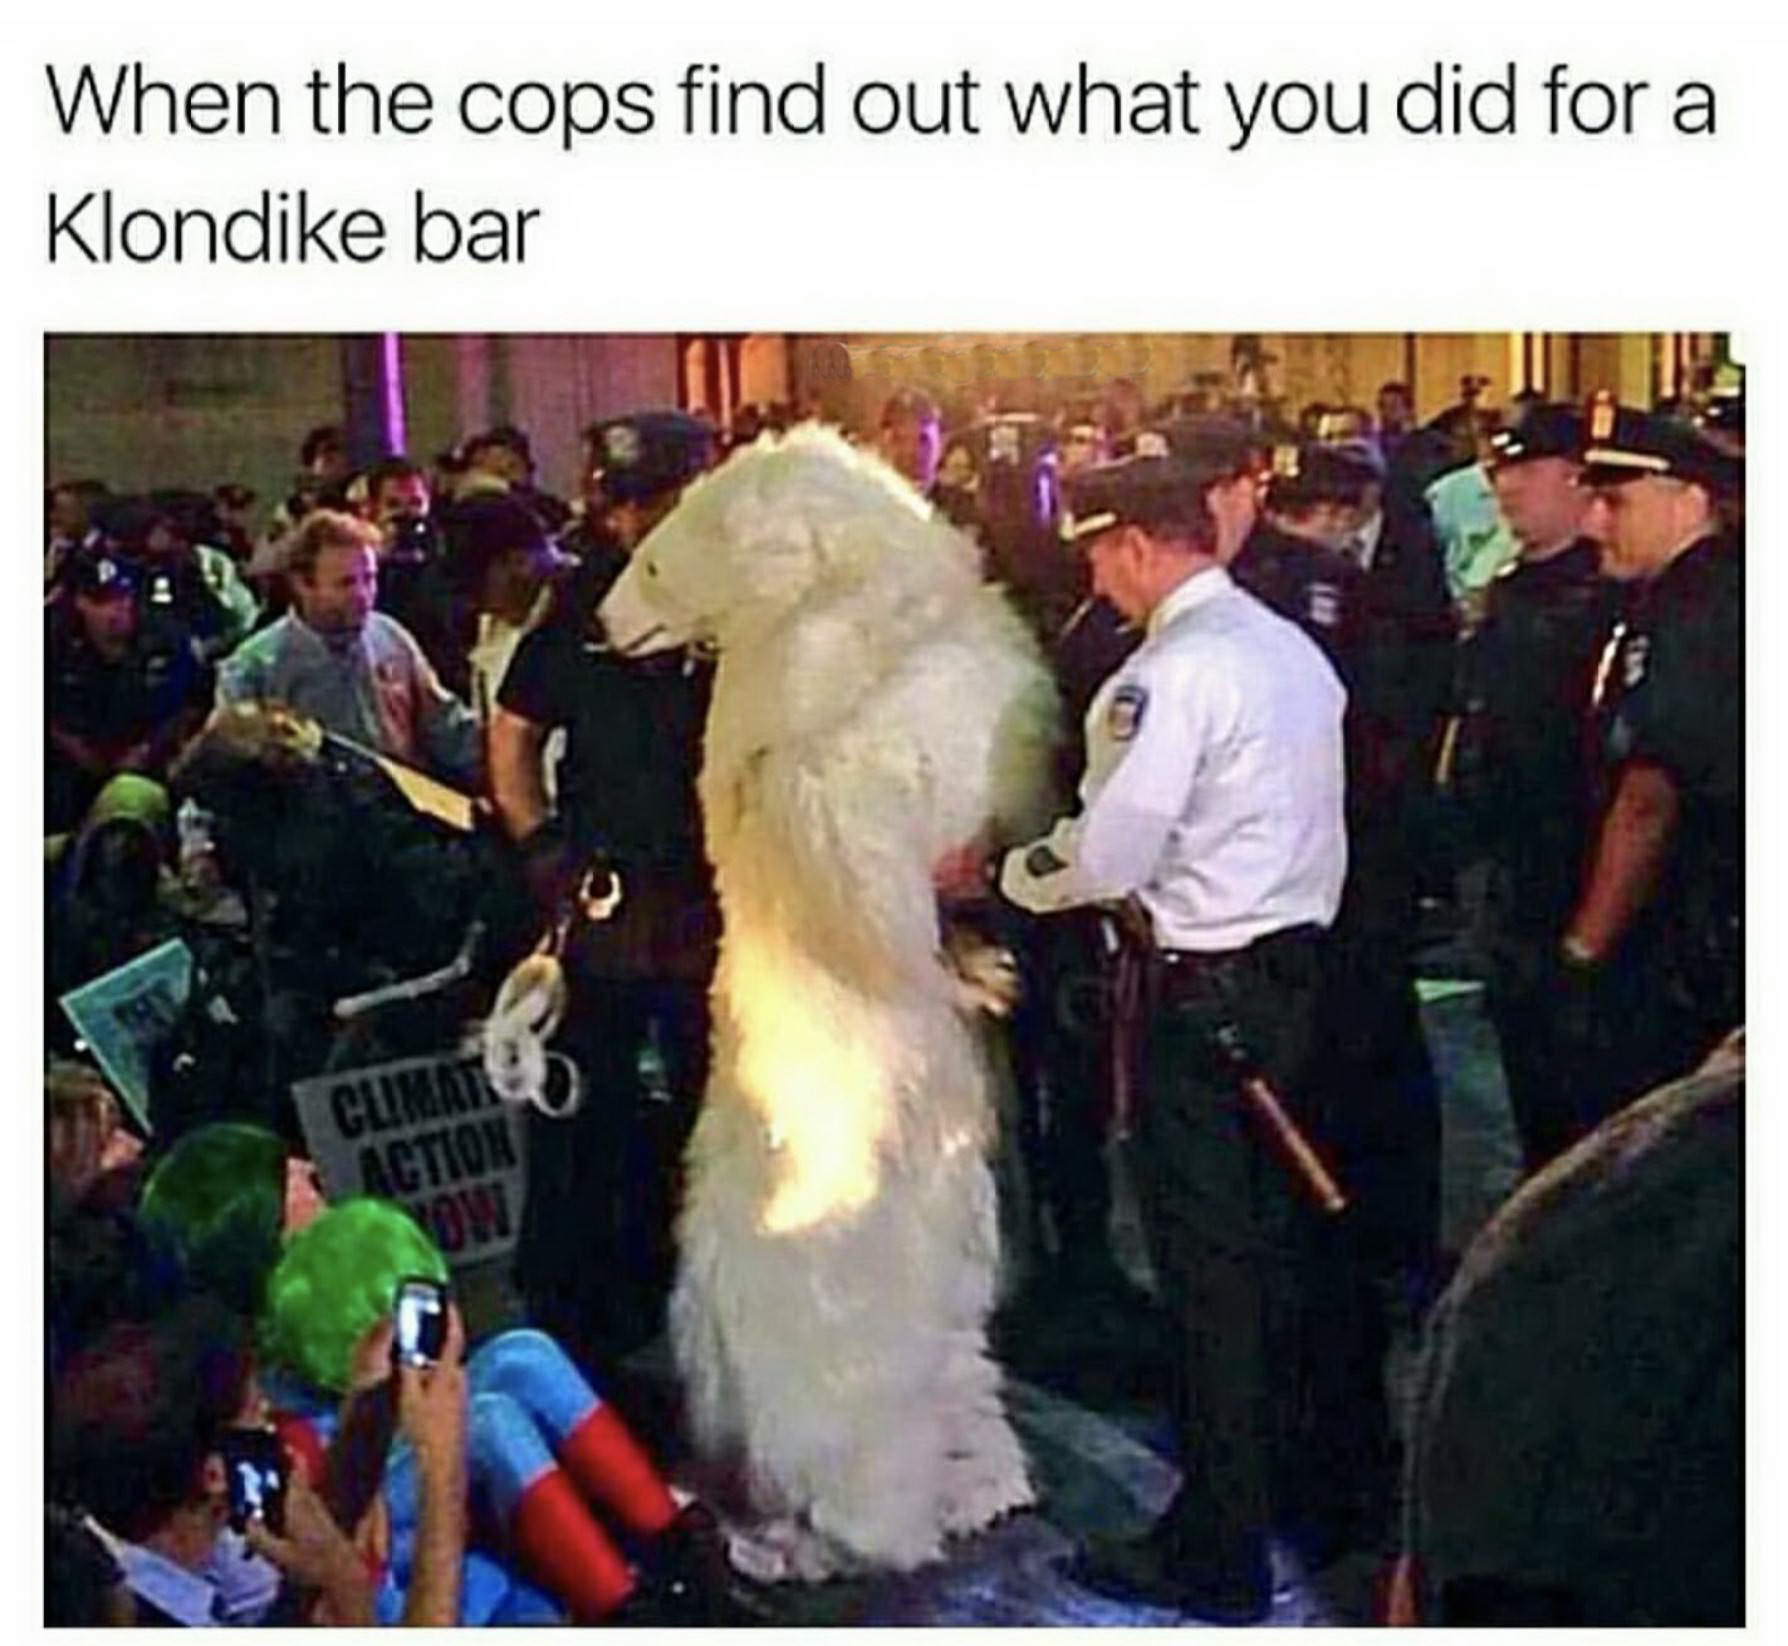 cops find out what you did - When the cops find out what you did for a Klondike bar Climat Action Wow